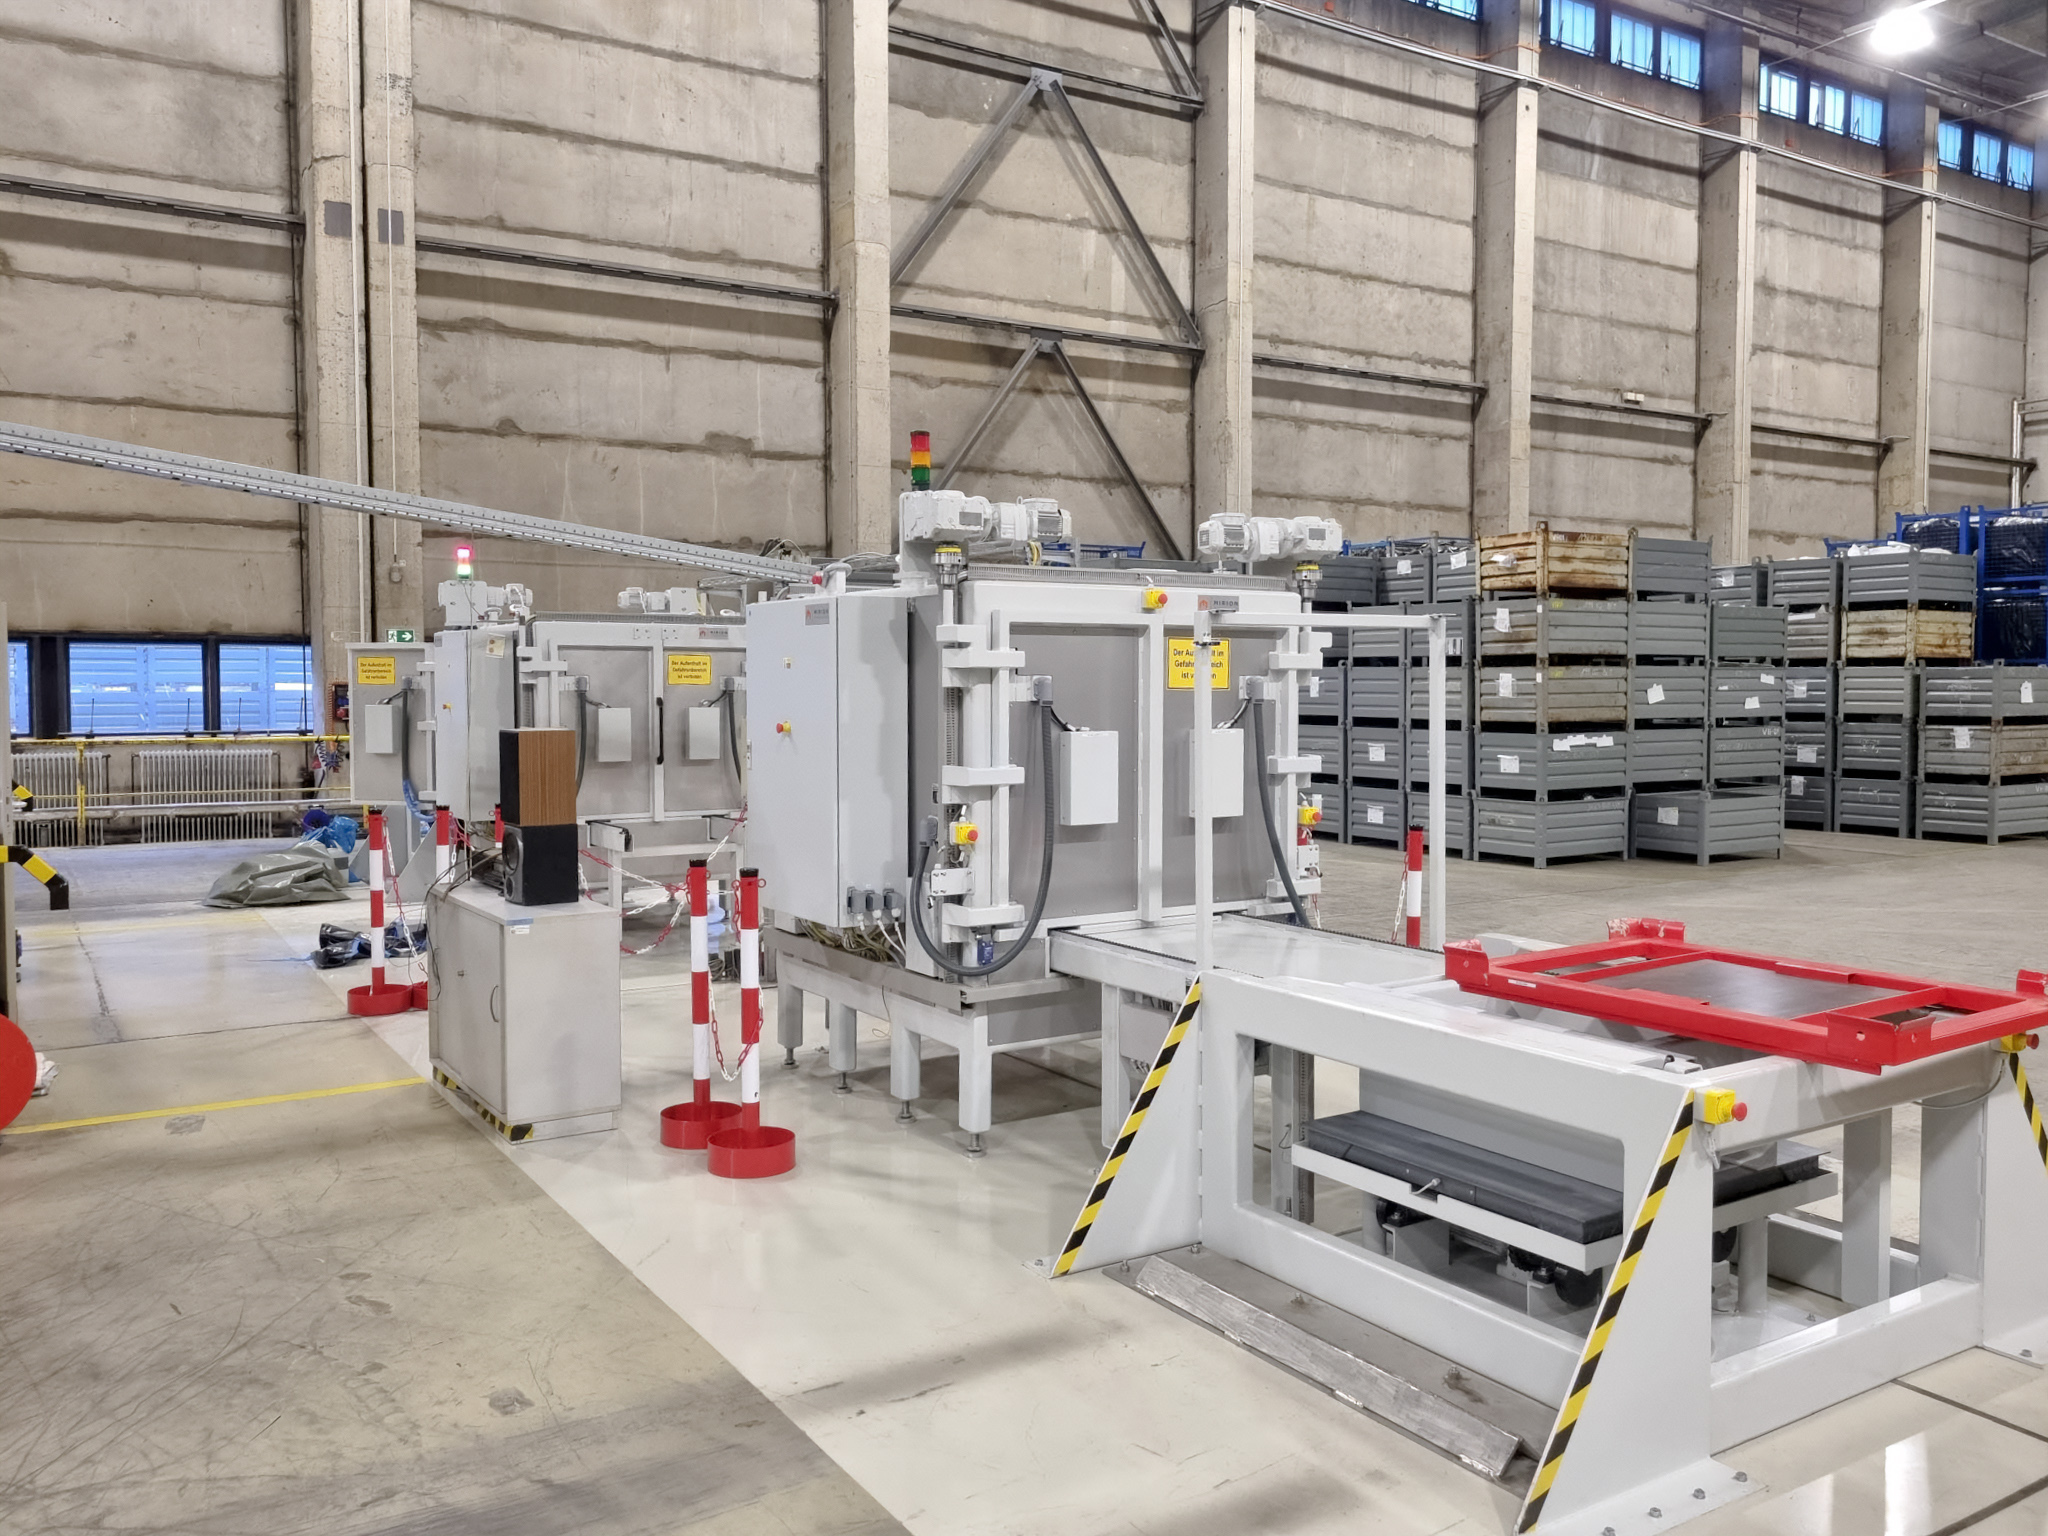 Together with technological partners, MicroStep developed and produced two radiation measurement chambers, type RTM643NG, which are operated by Entsorgungswerk für Nuklearanlagen GmbH in Greifswald (Mecklenburg-Vorpommern). © MicroStep Europe